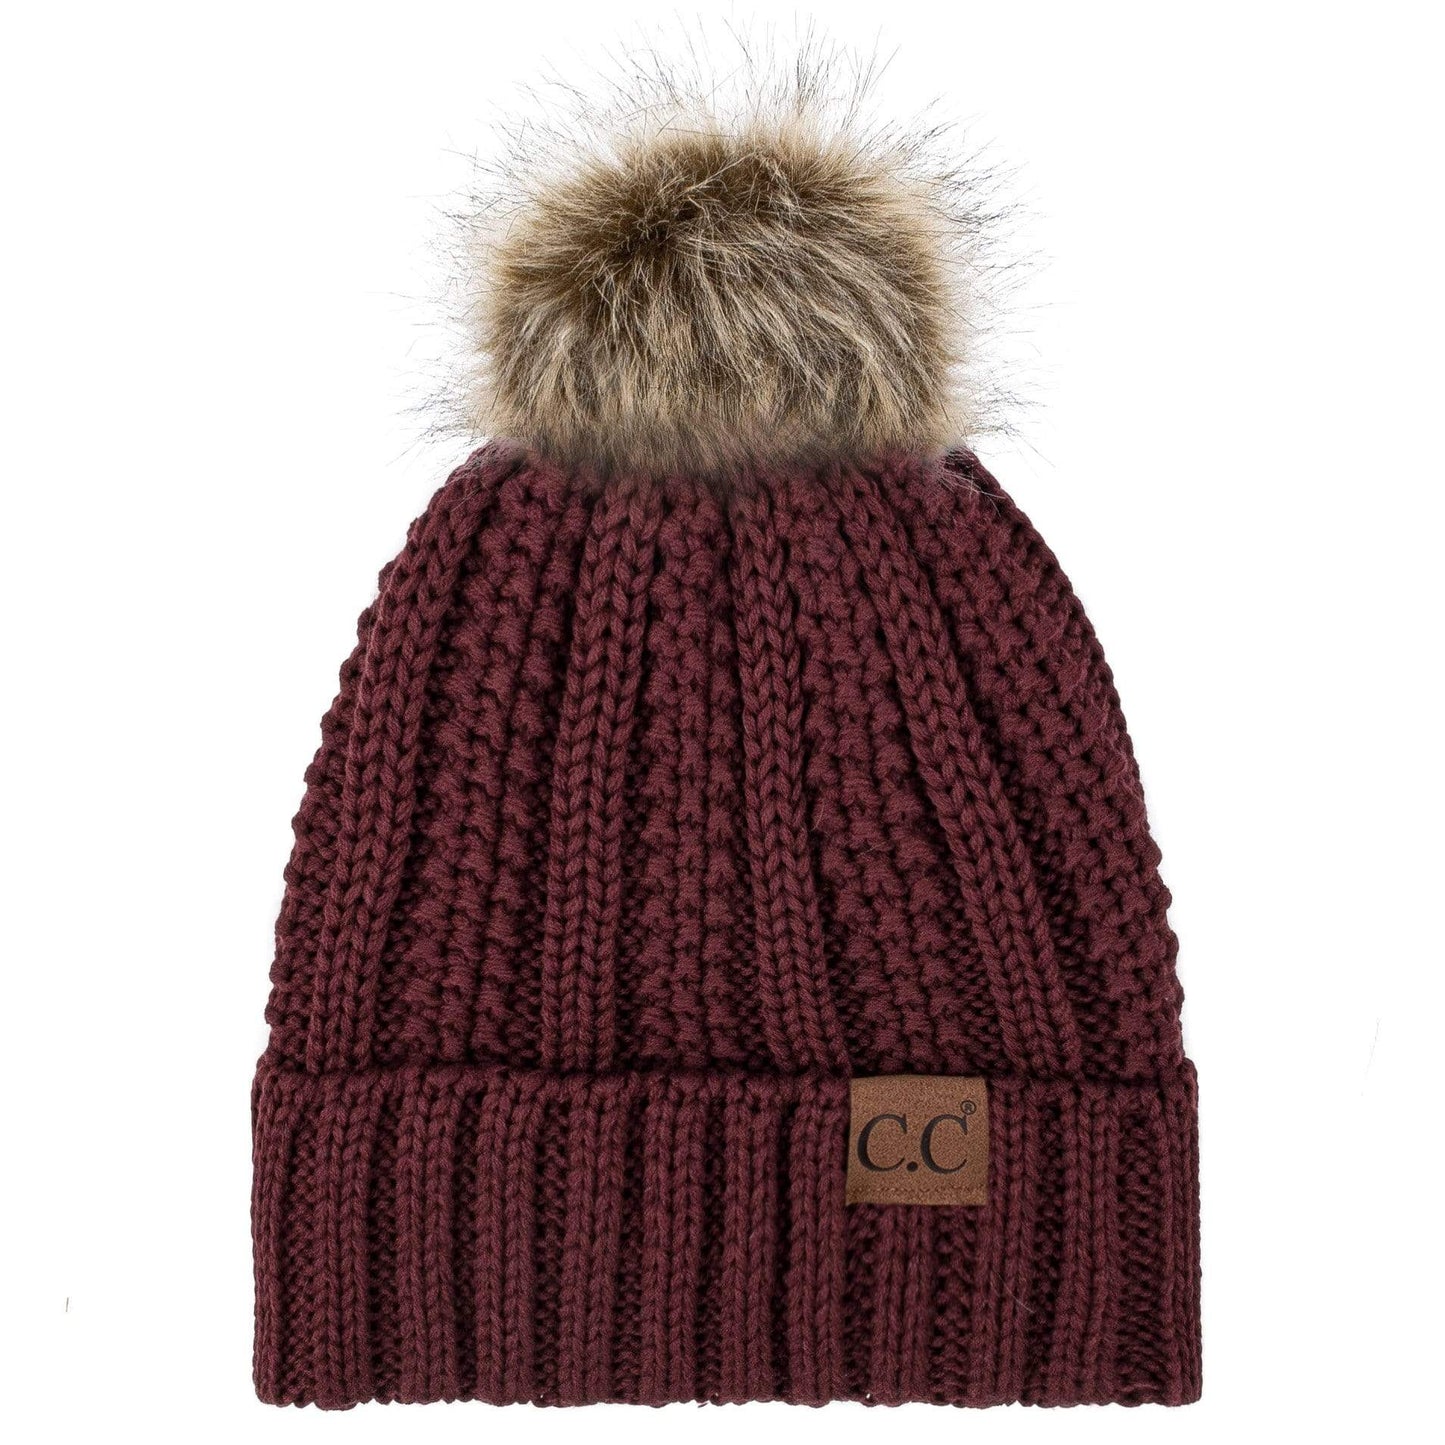 C.C Apparel C.C YJ820 - Thick Cable Knit Hat Faux Fur Pom Pom Fleece Lined Skull Cap Cuff Beanie